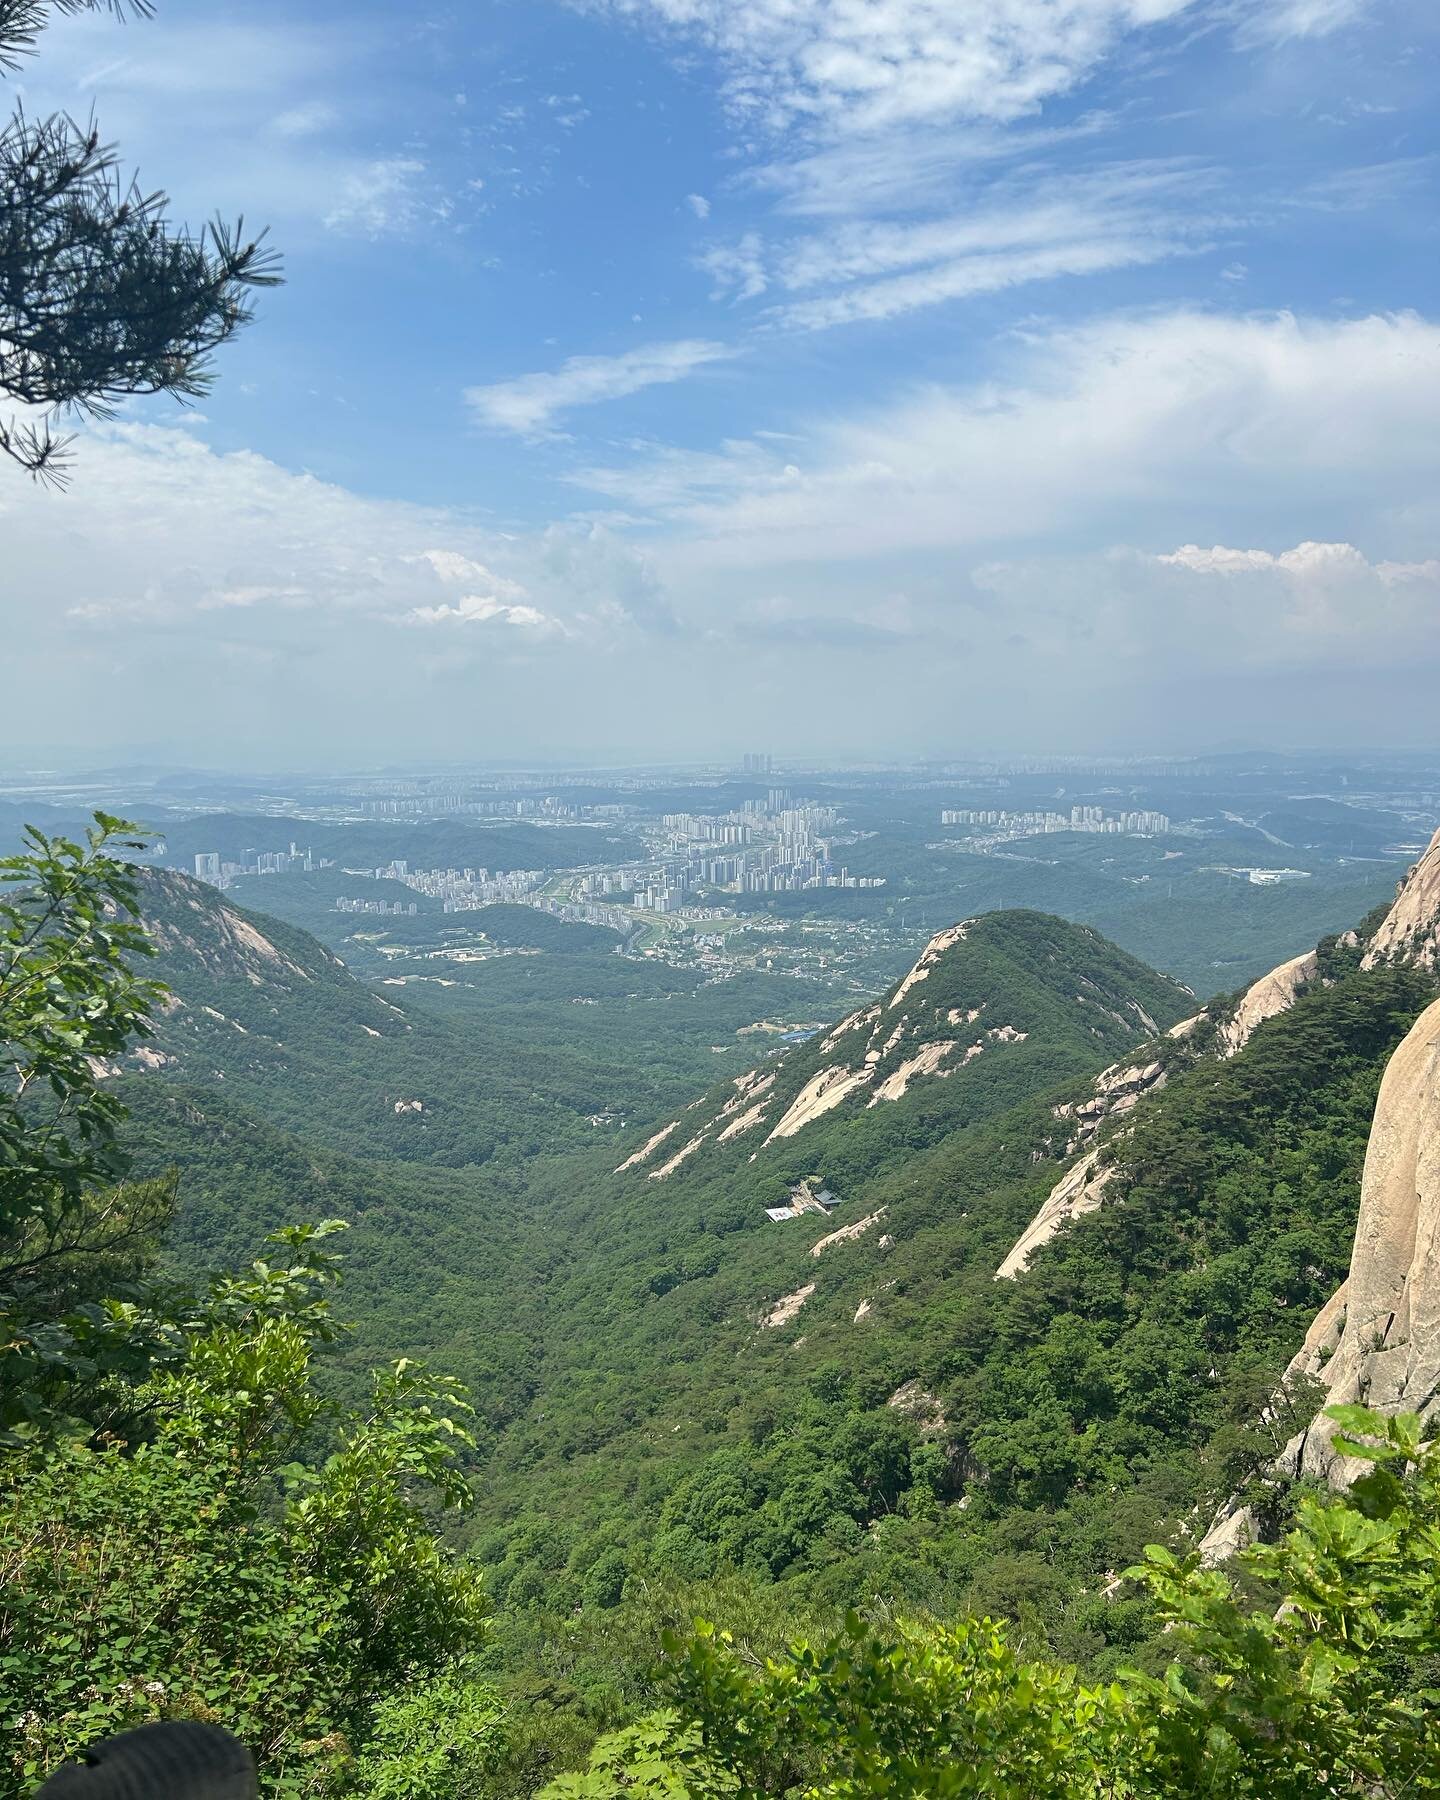 The highest point in Seoul: Baegundae Peak in Bukhansan National Park 🇰🇷

This is from back in May when Laura was in South Korea. Always searching out mountains even in the city 🔎 

#mountains #outdooradventure #hiking #summit #southkorea #highest